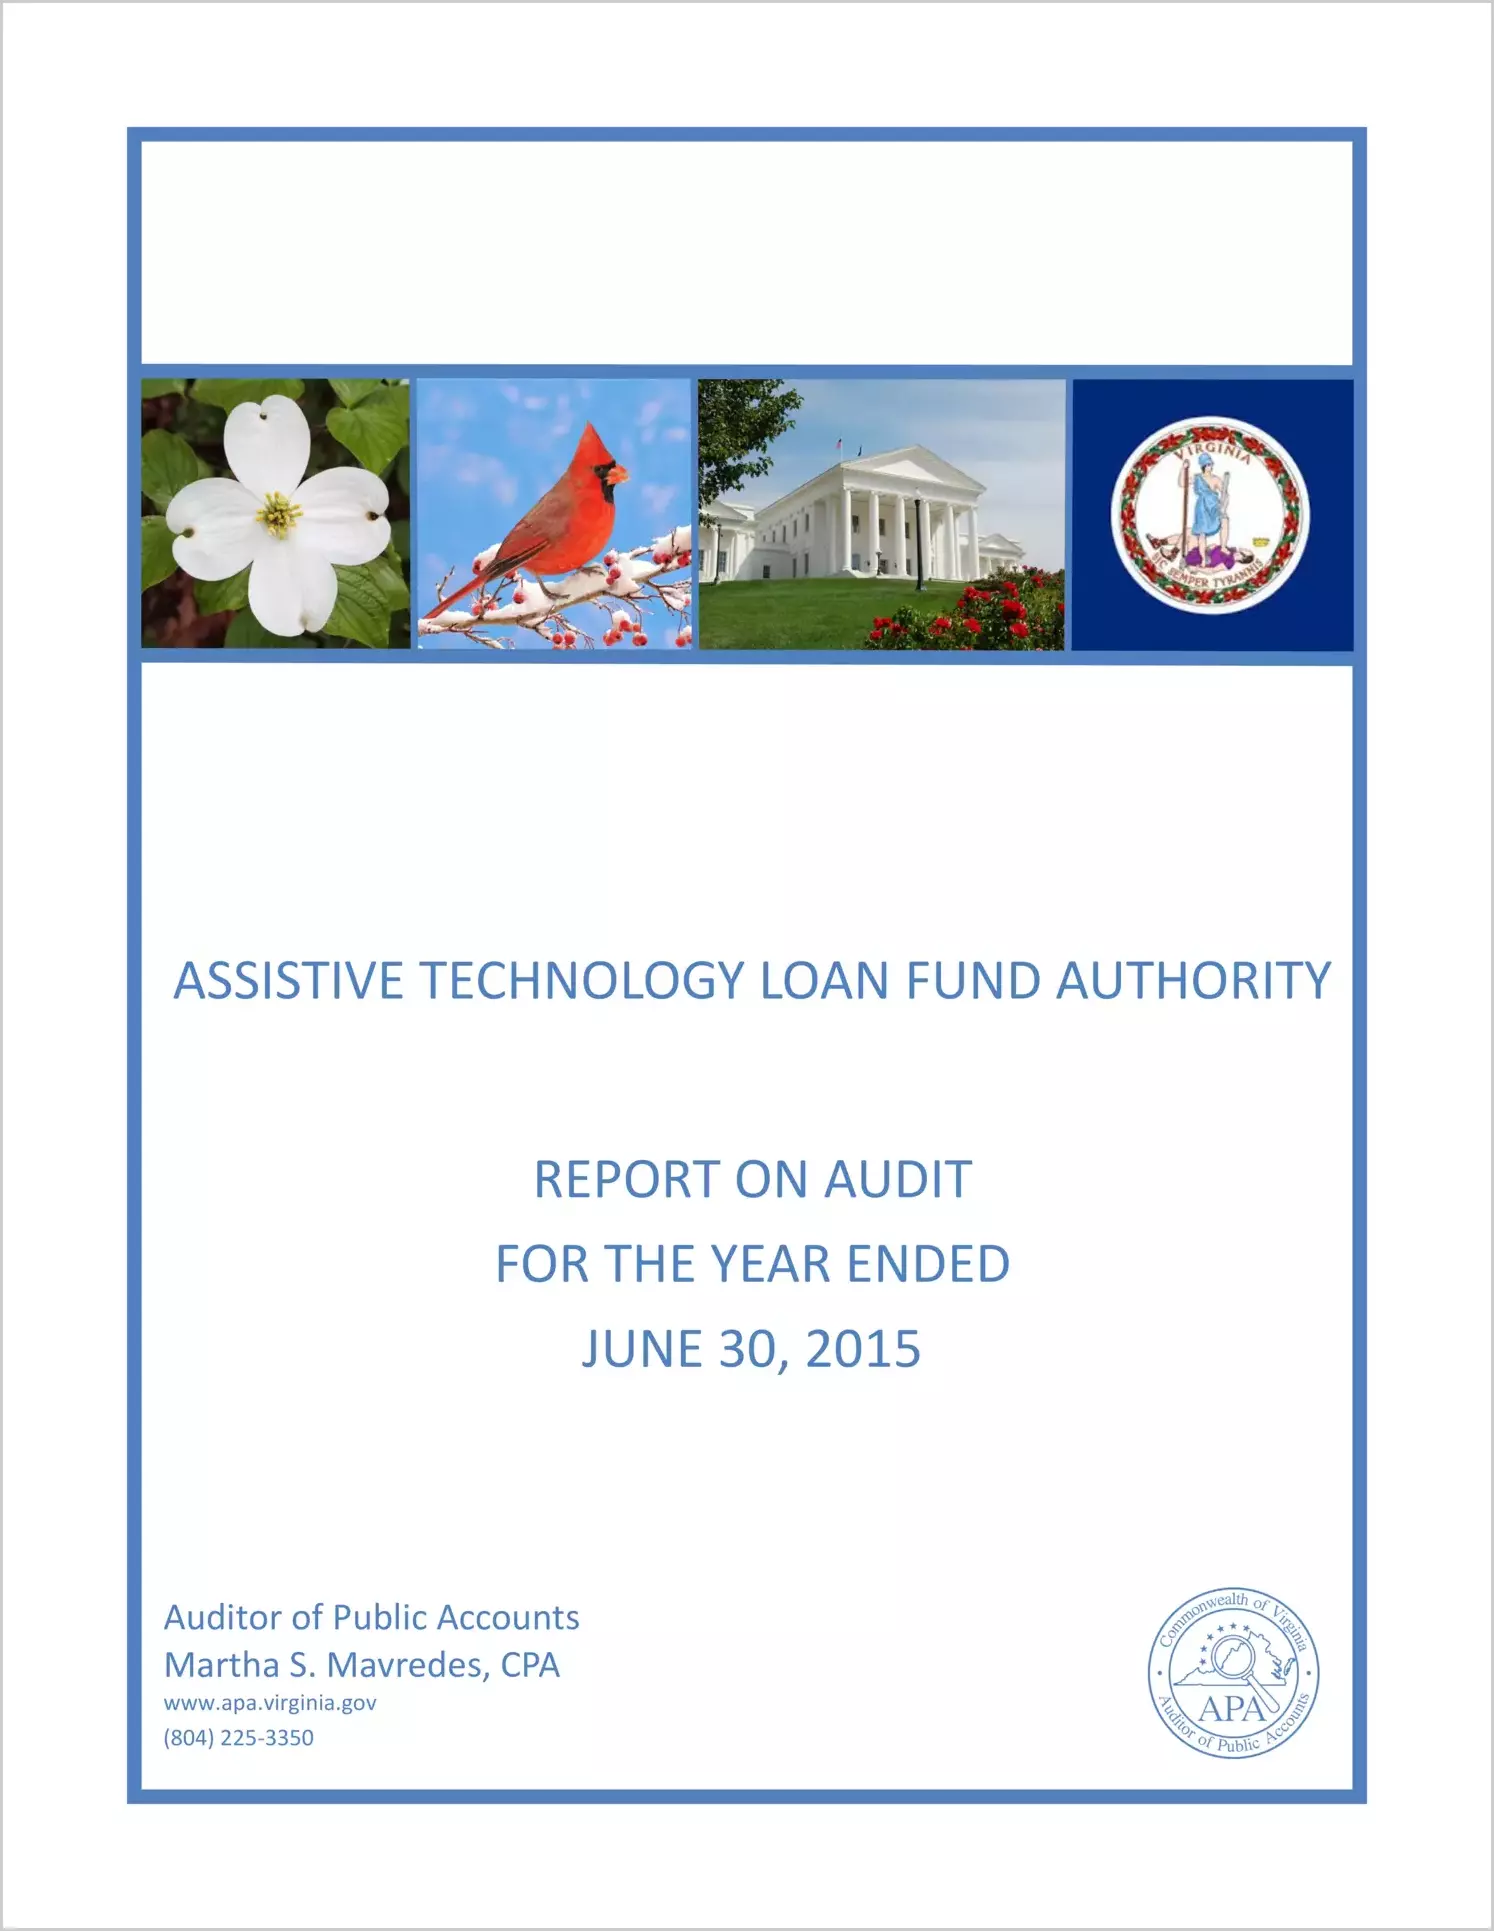 Assistive Technology Loan Fund Authority Report on Audit for the fiscal year ended June 30, 2015